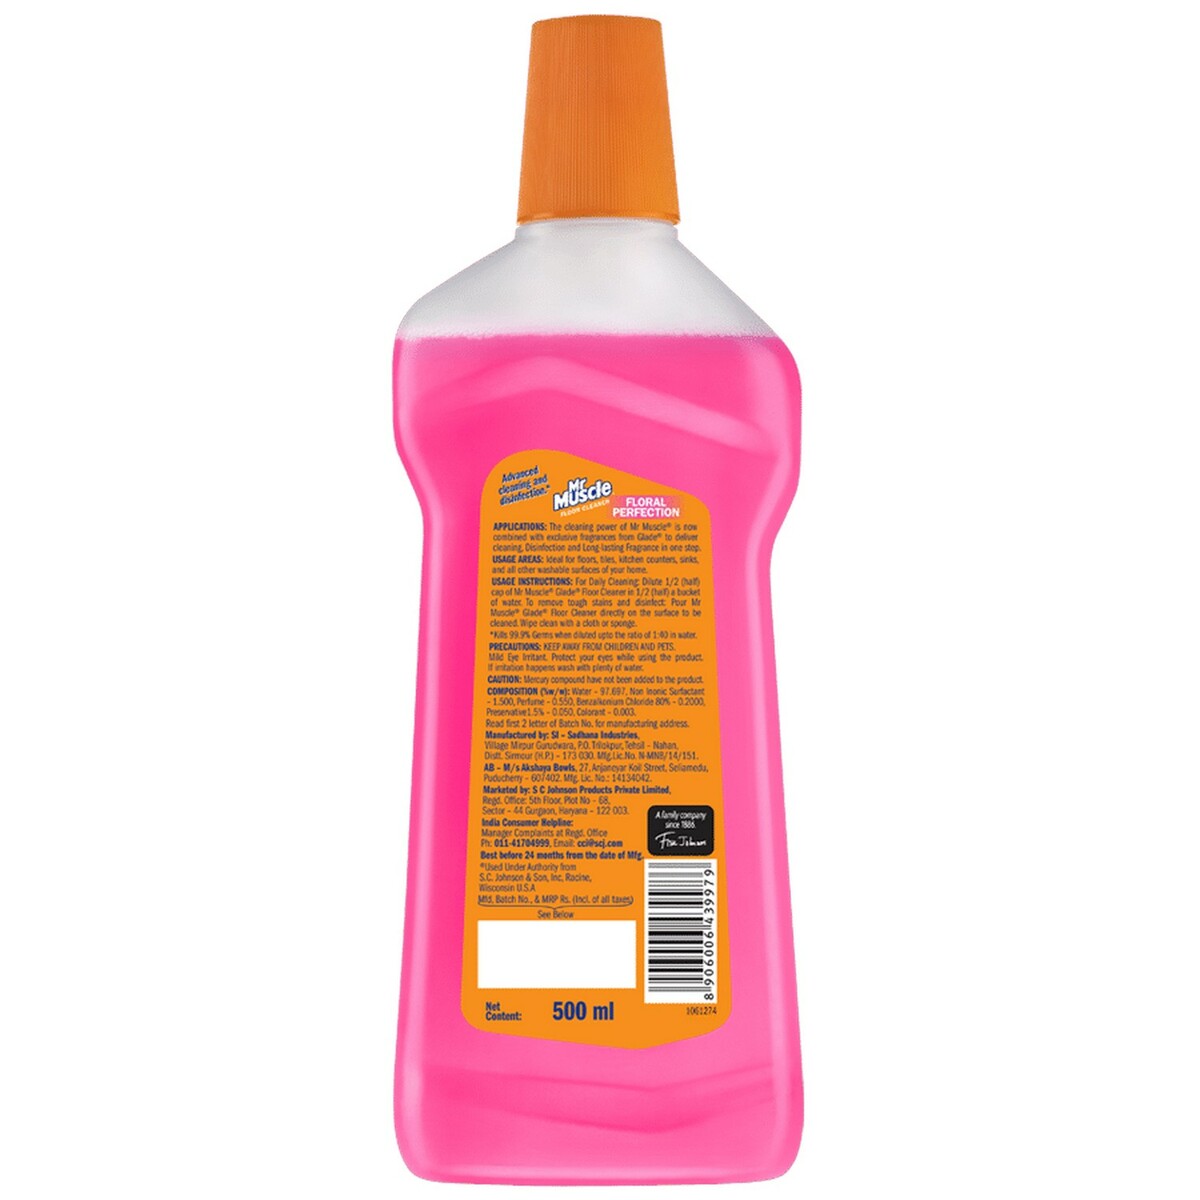 Mr. Muscle Floor Cleaner Floral Perfection 500ml